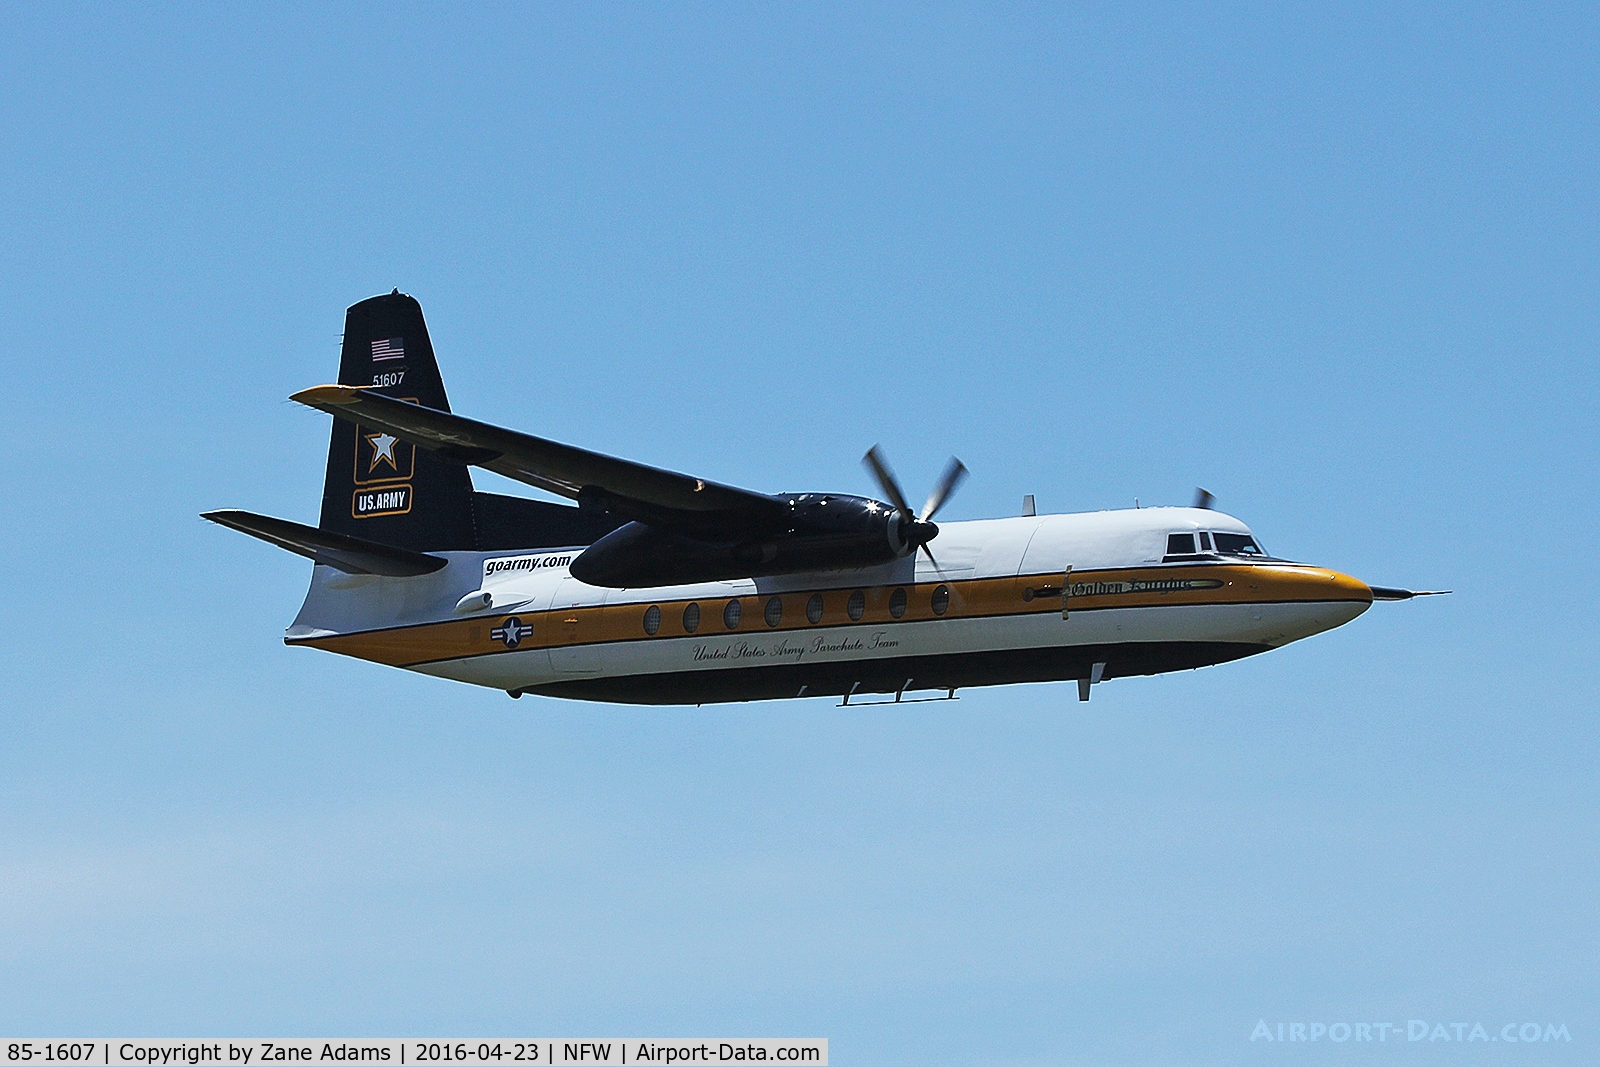 85-1607, 1983 Fokker C-31A (F27-400M) Troopship C/N 10653, At the 2016 Airpower Expo - NAS Fort Worth